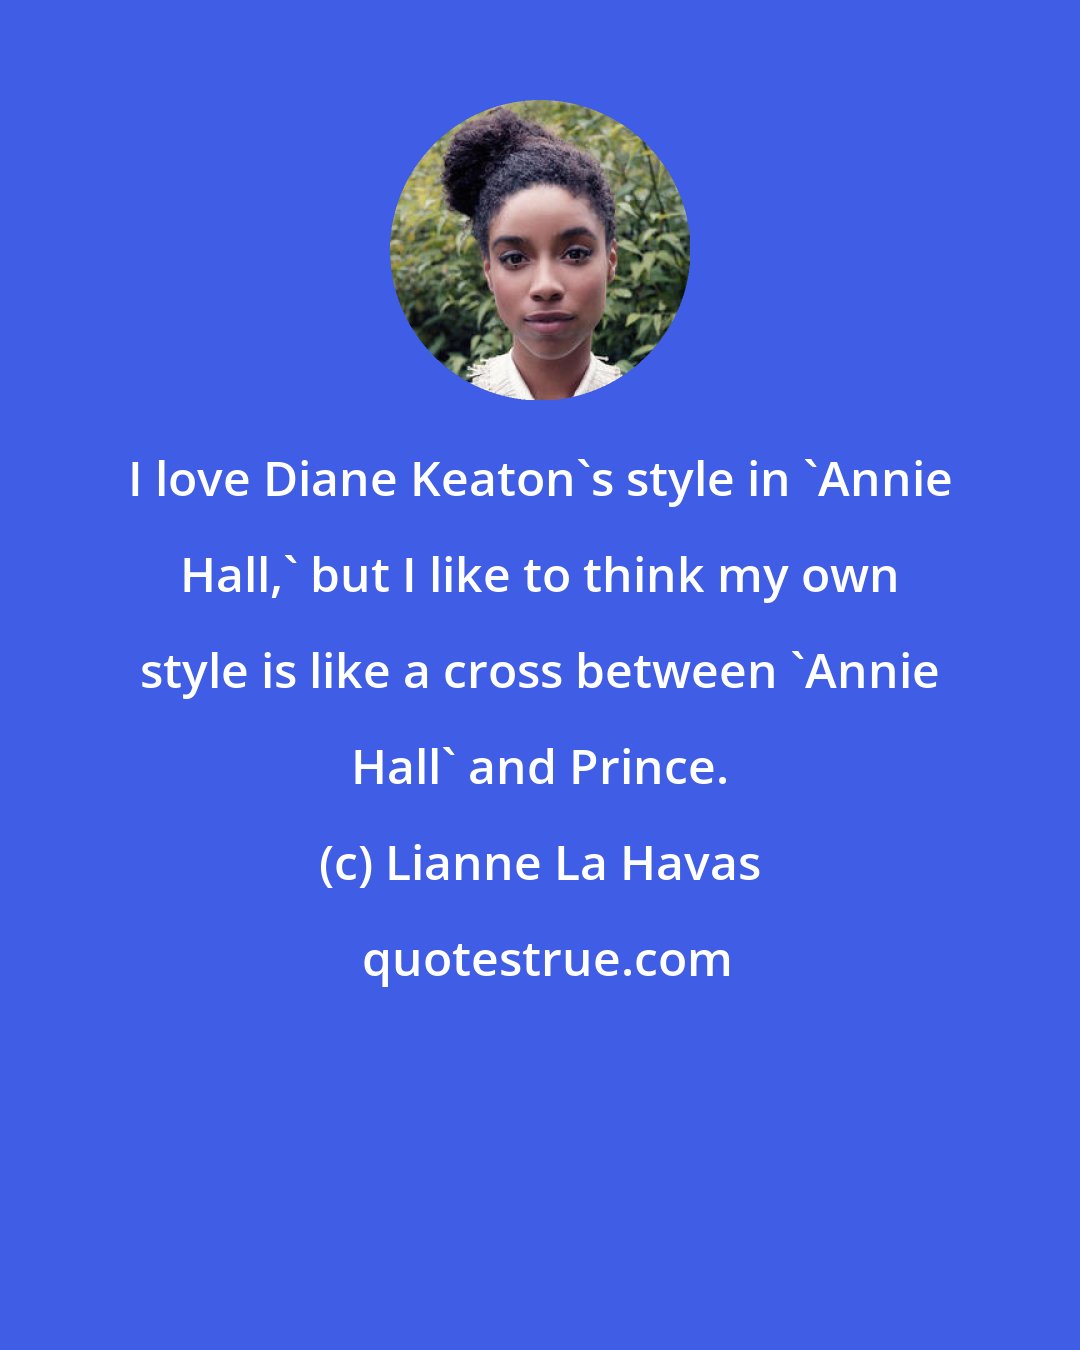 Lianne La Havas: I love Diane Keaton's style in 'Annie Hall,' but I like to think my own style is like a cross between 'Annie Hall' and Prince.